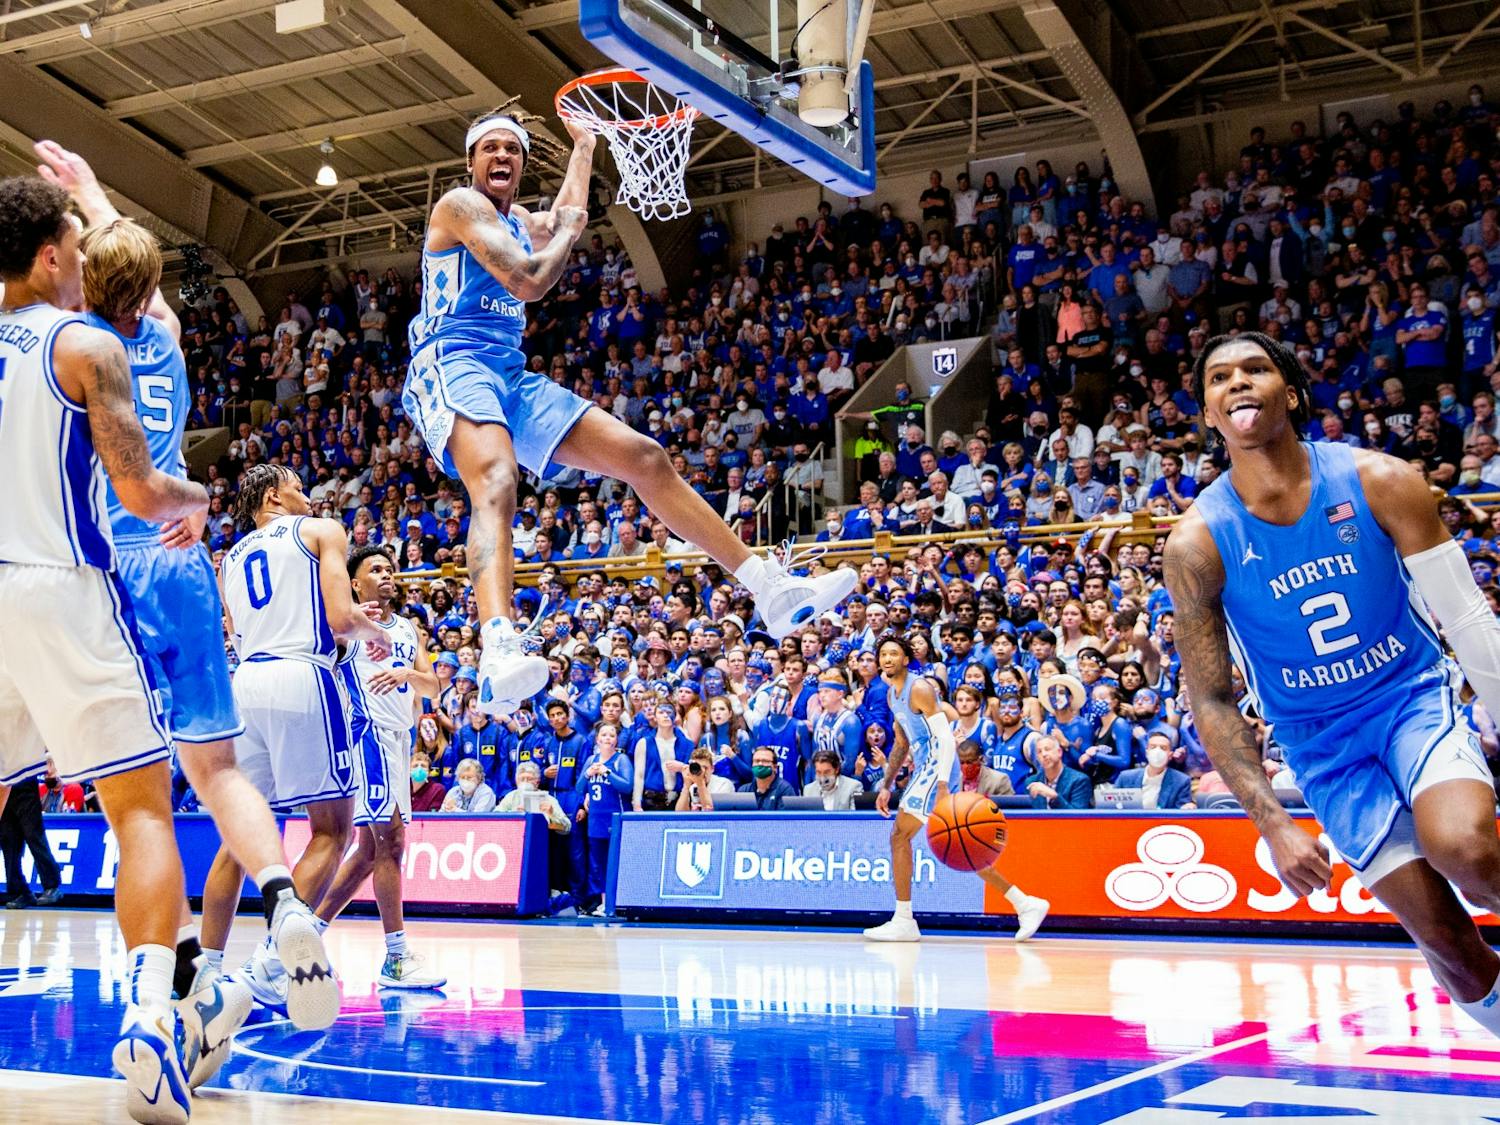 Junior forward Armando Bacot (5) dunks the ball at the game against Duke at Cameron Stadium on March 5, 2022. UNC won 94-81.